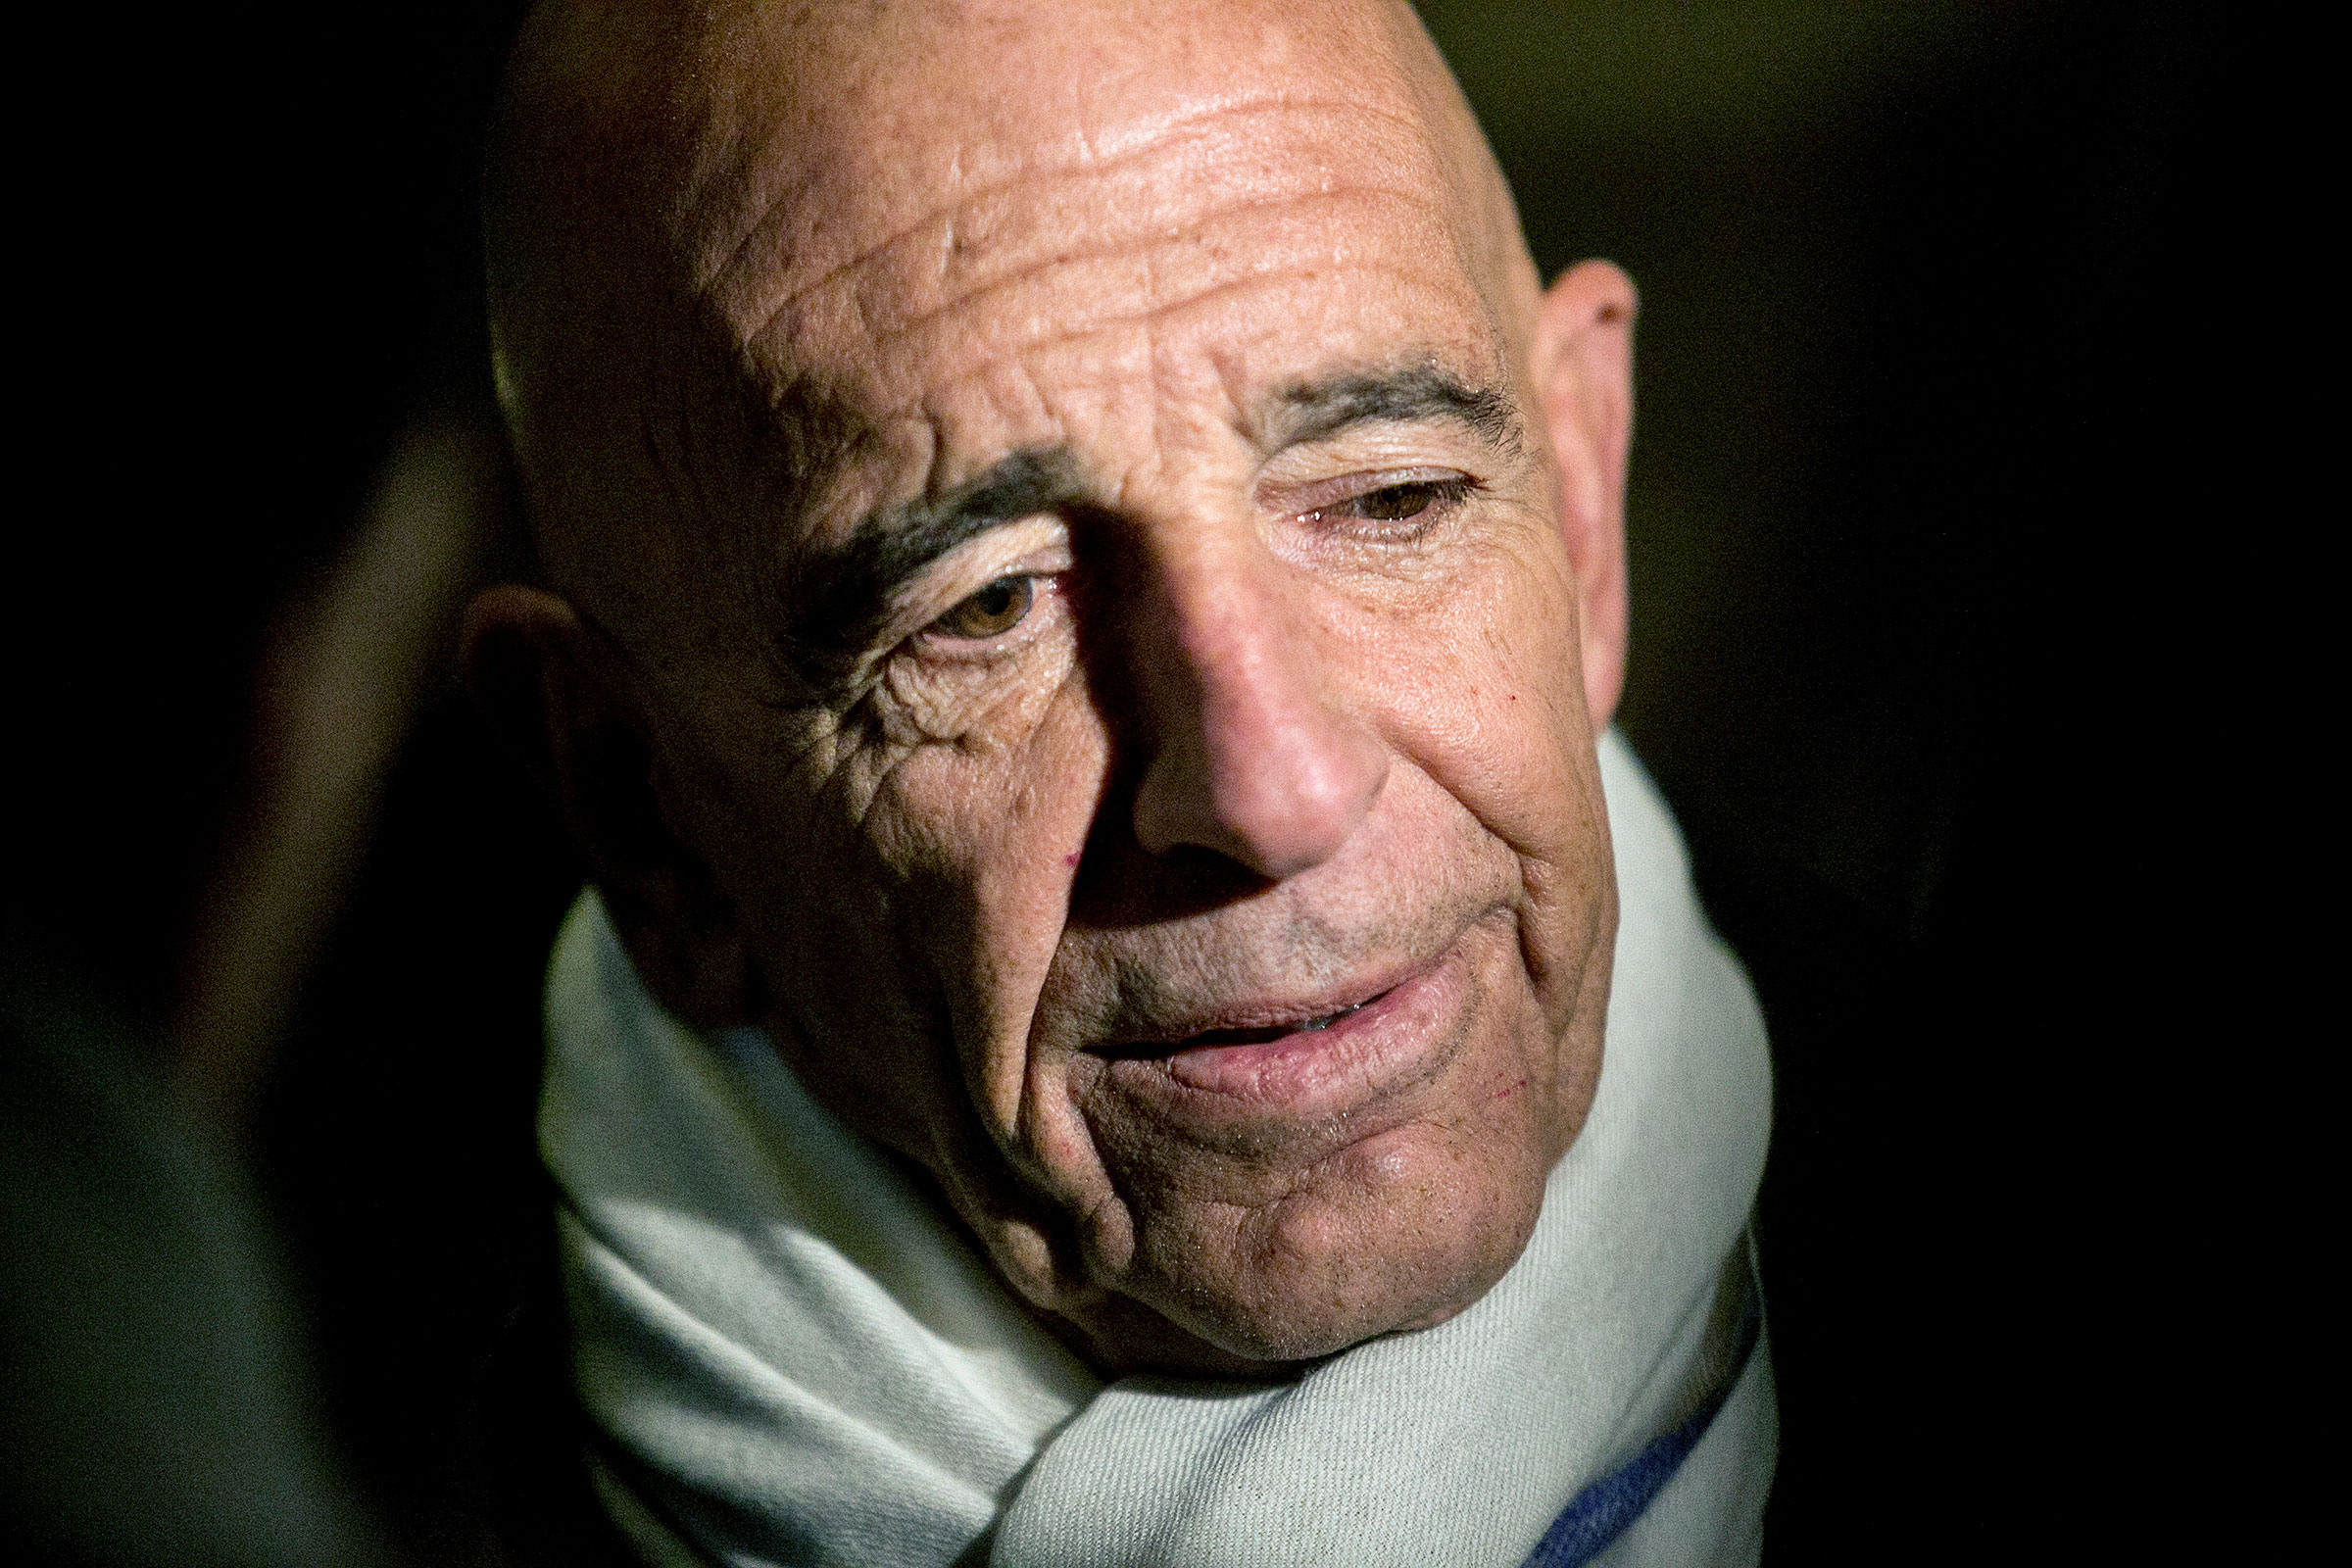 Thomas Barrack, then-chairman of President Donald Trump's inaugural committee, talks to reporters in the lobby of Trump Tower in New York on Jan. 10, 2017. (Sam Hodgson—The New York Times/Redux)